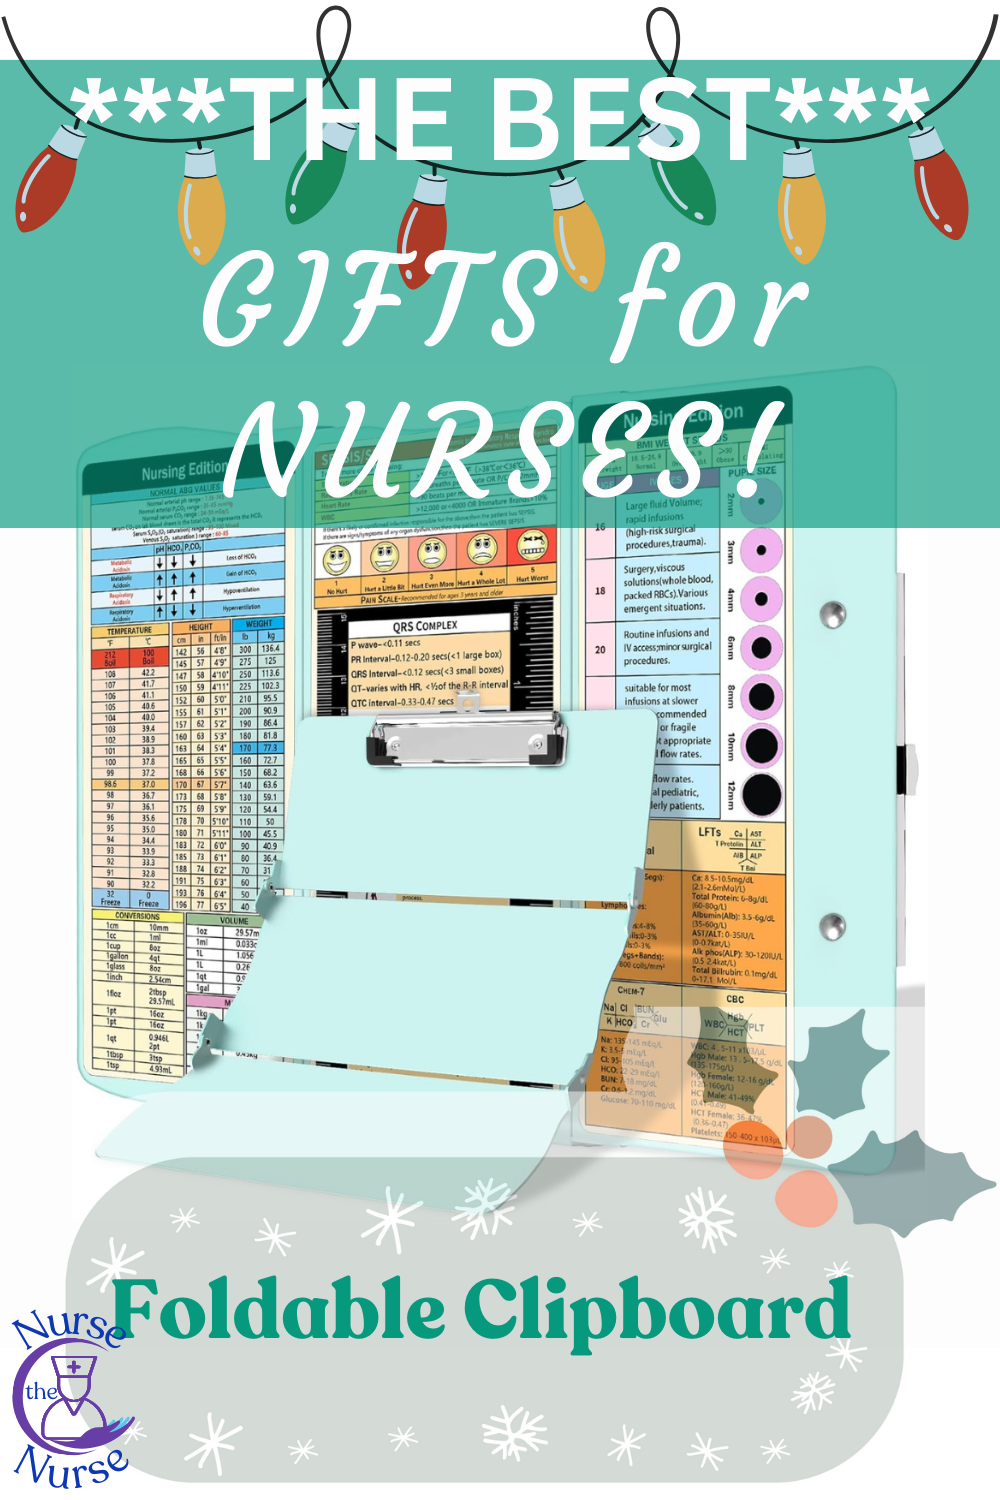 Personalized foldable clipboard as a thoughtful gift for nurses